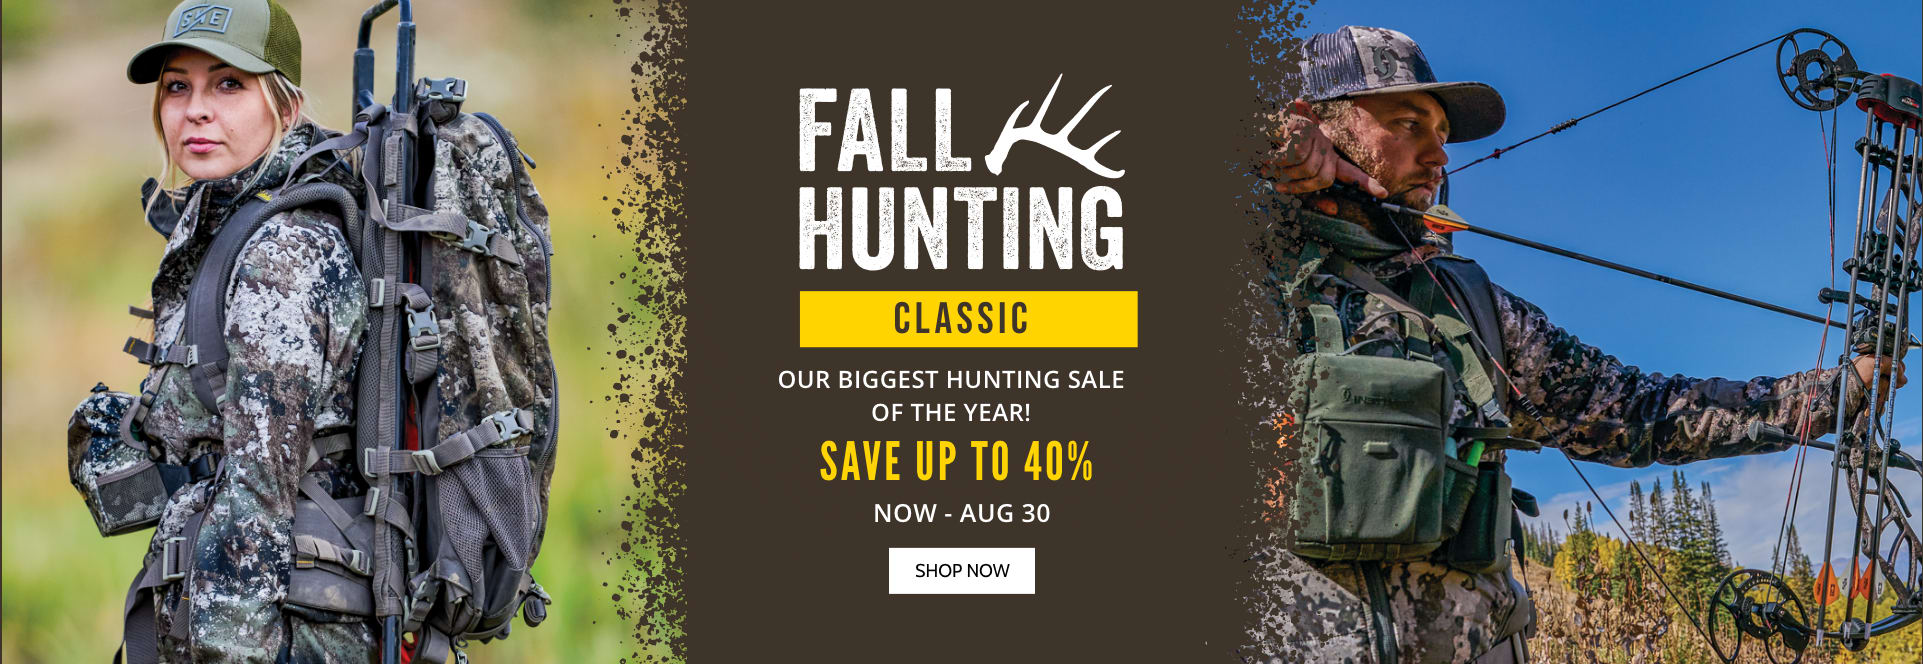 Fall Hunting Classic - Shop our Biggest Sale of the Year!